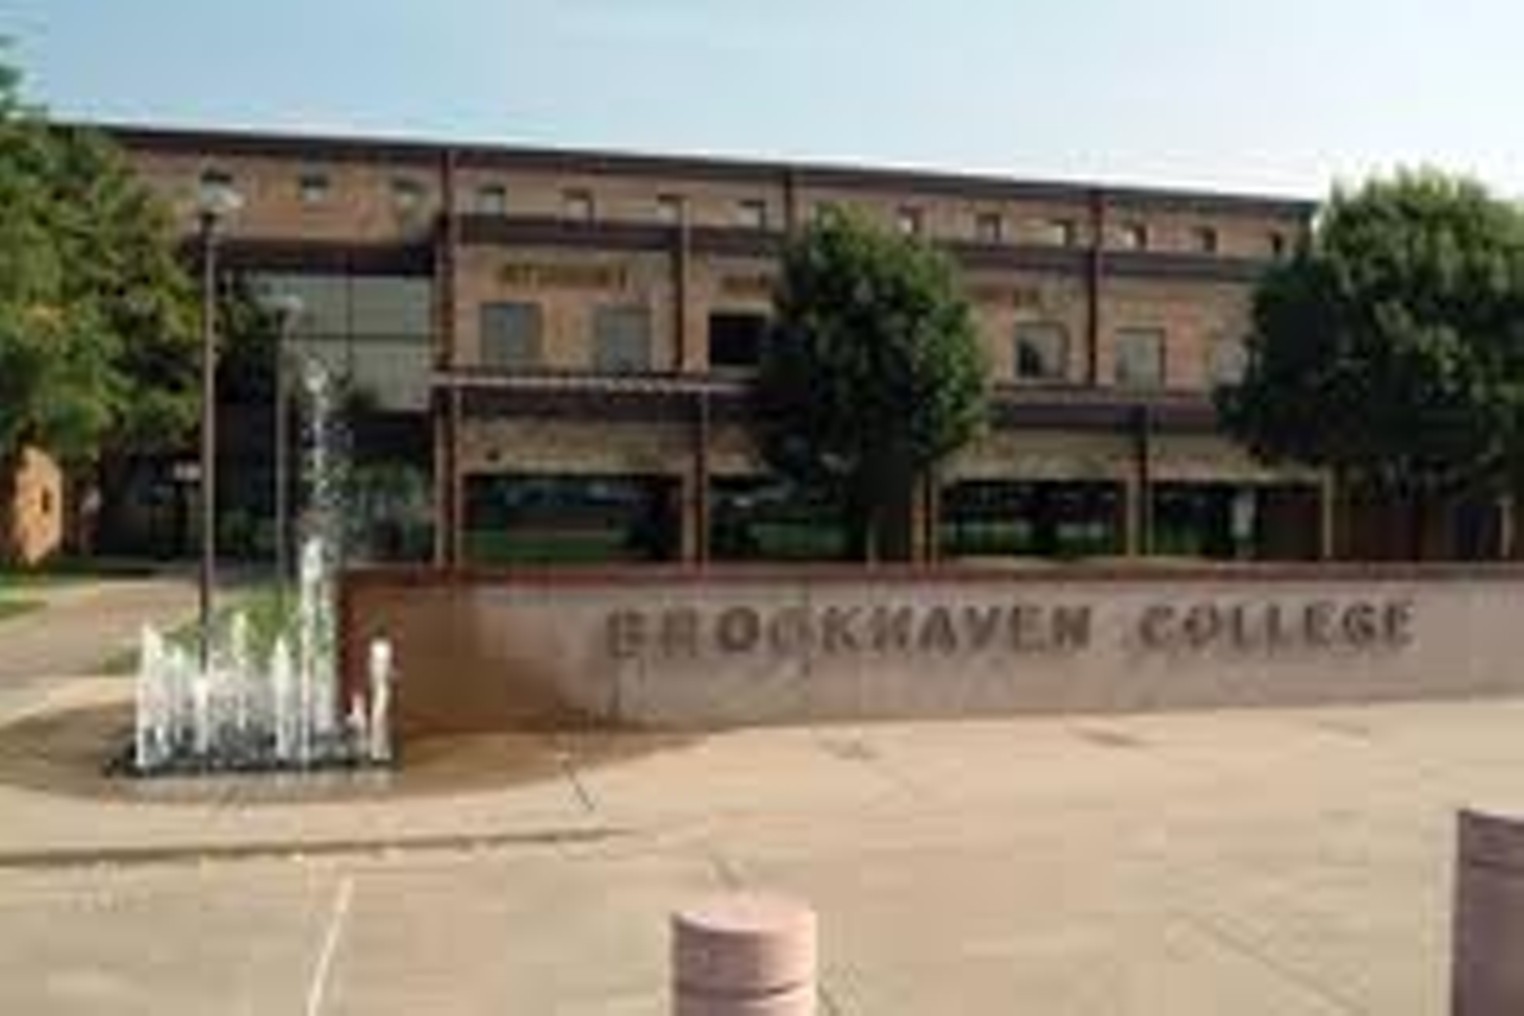 Brookhaven College - Farmers Branch, TX